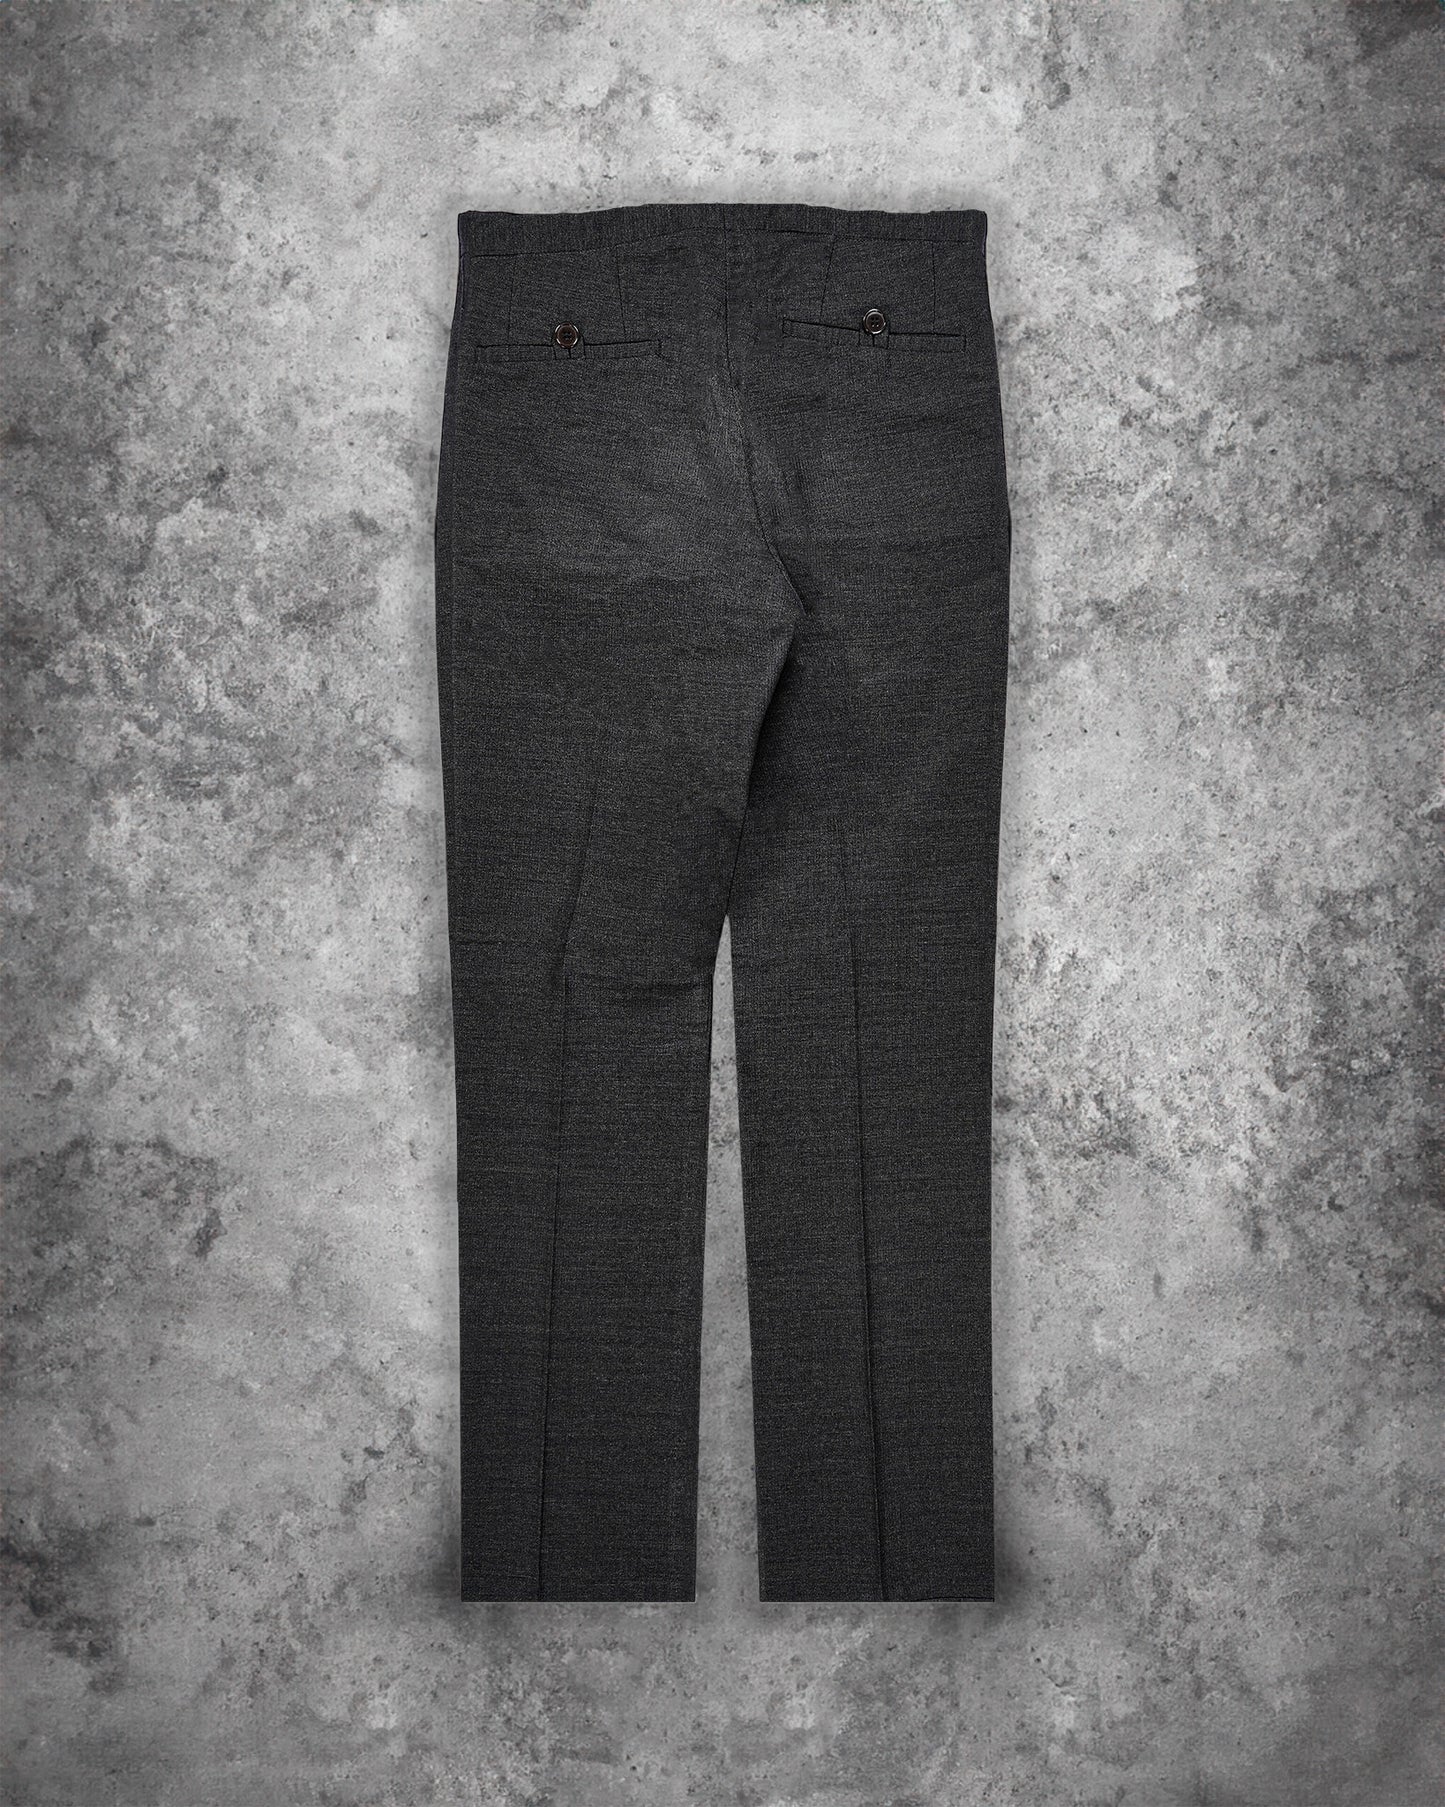 Carol Christian Poell Wool Trousers - AW07 “Disjointed” (PM/2104L TEER/9)